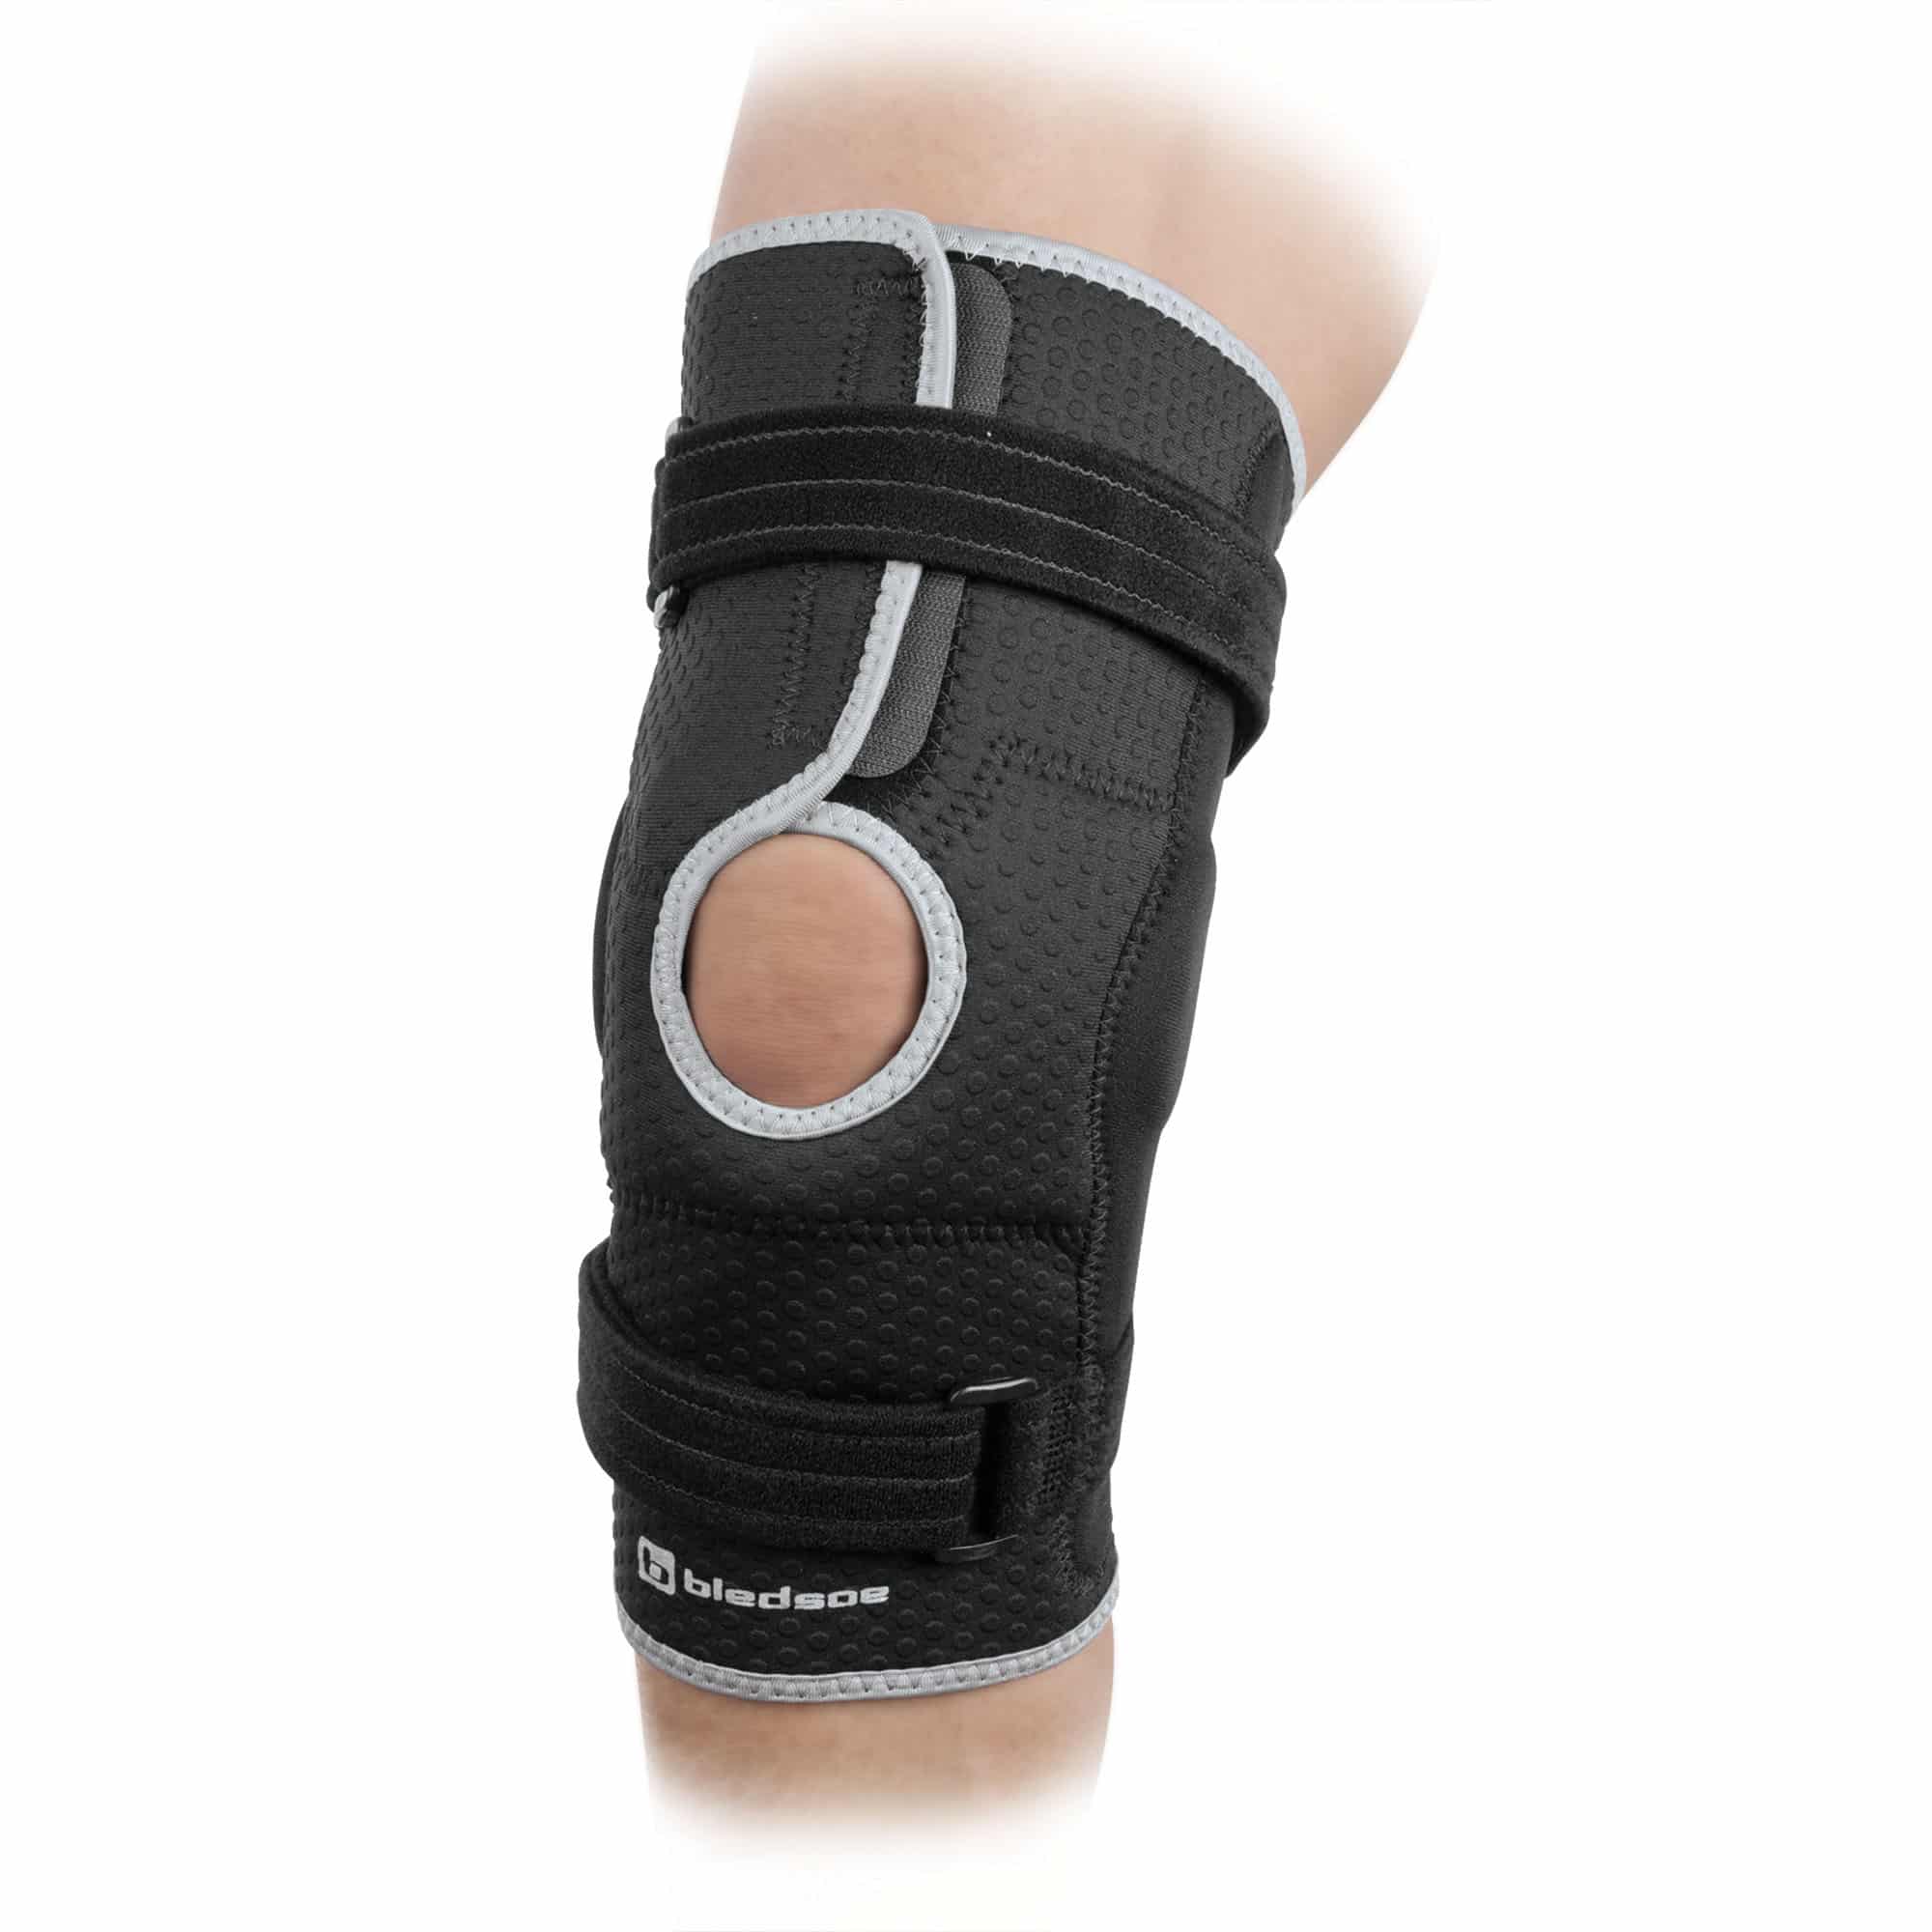 Buy Breg Buttress Support Soft Knee Brace Online at Low Prices in India 